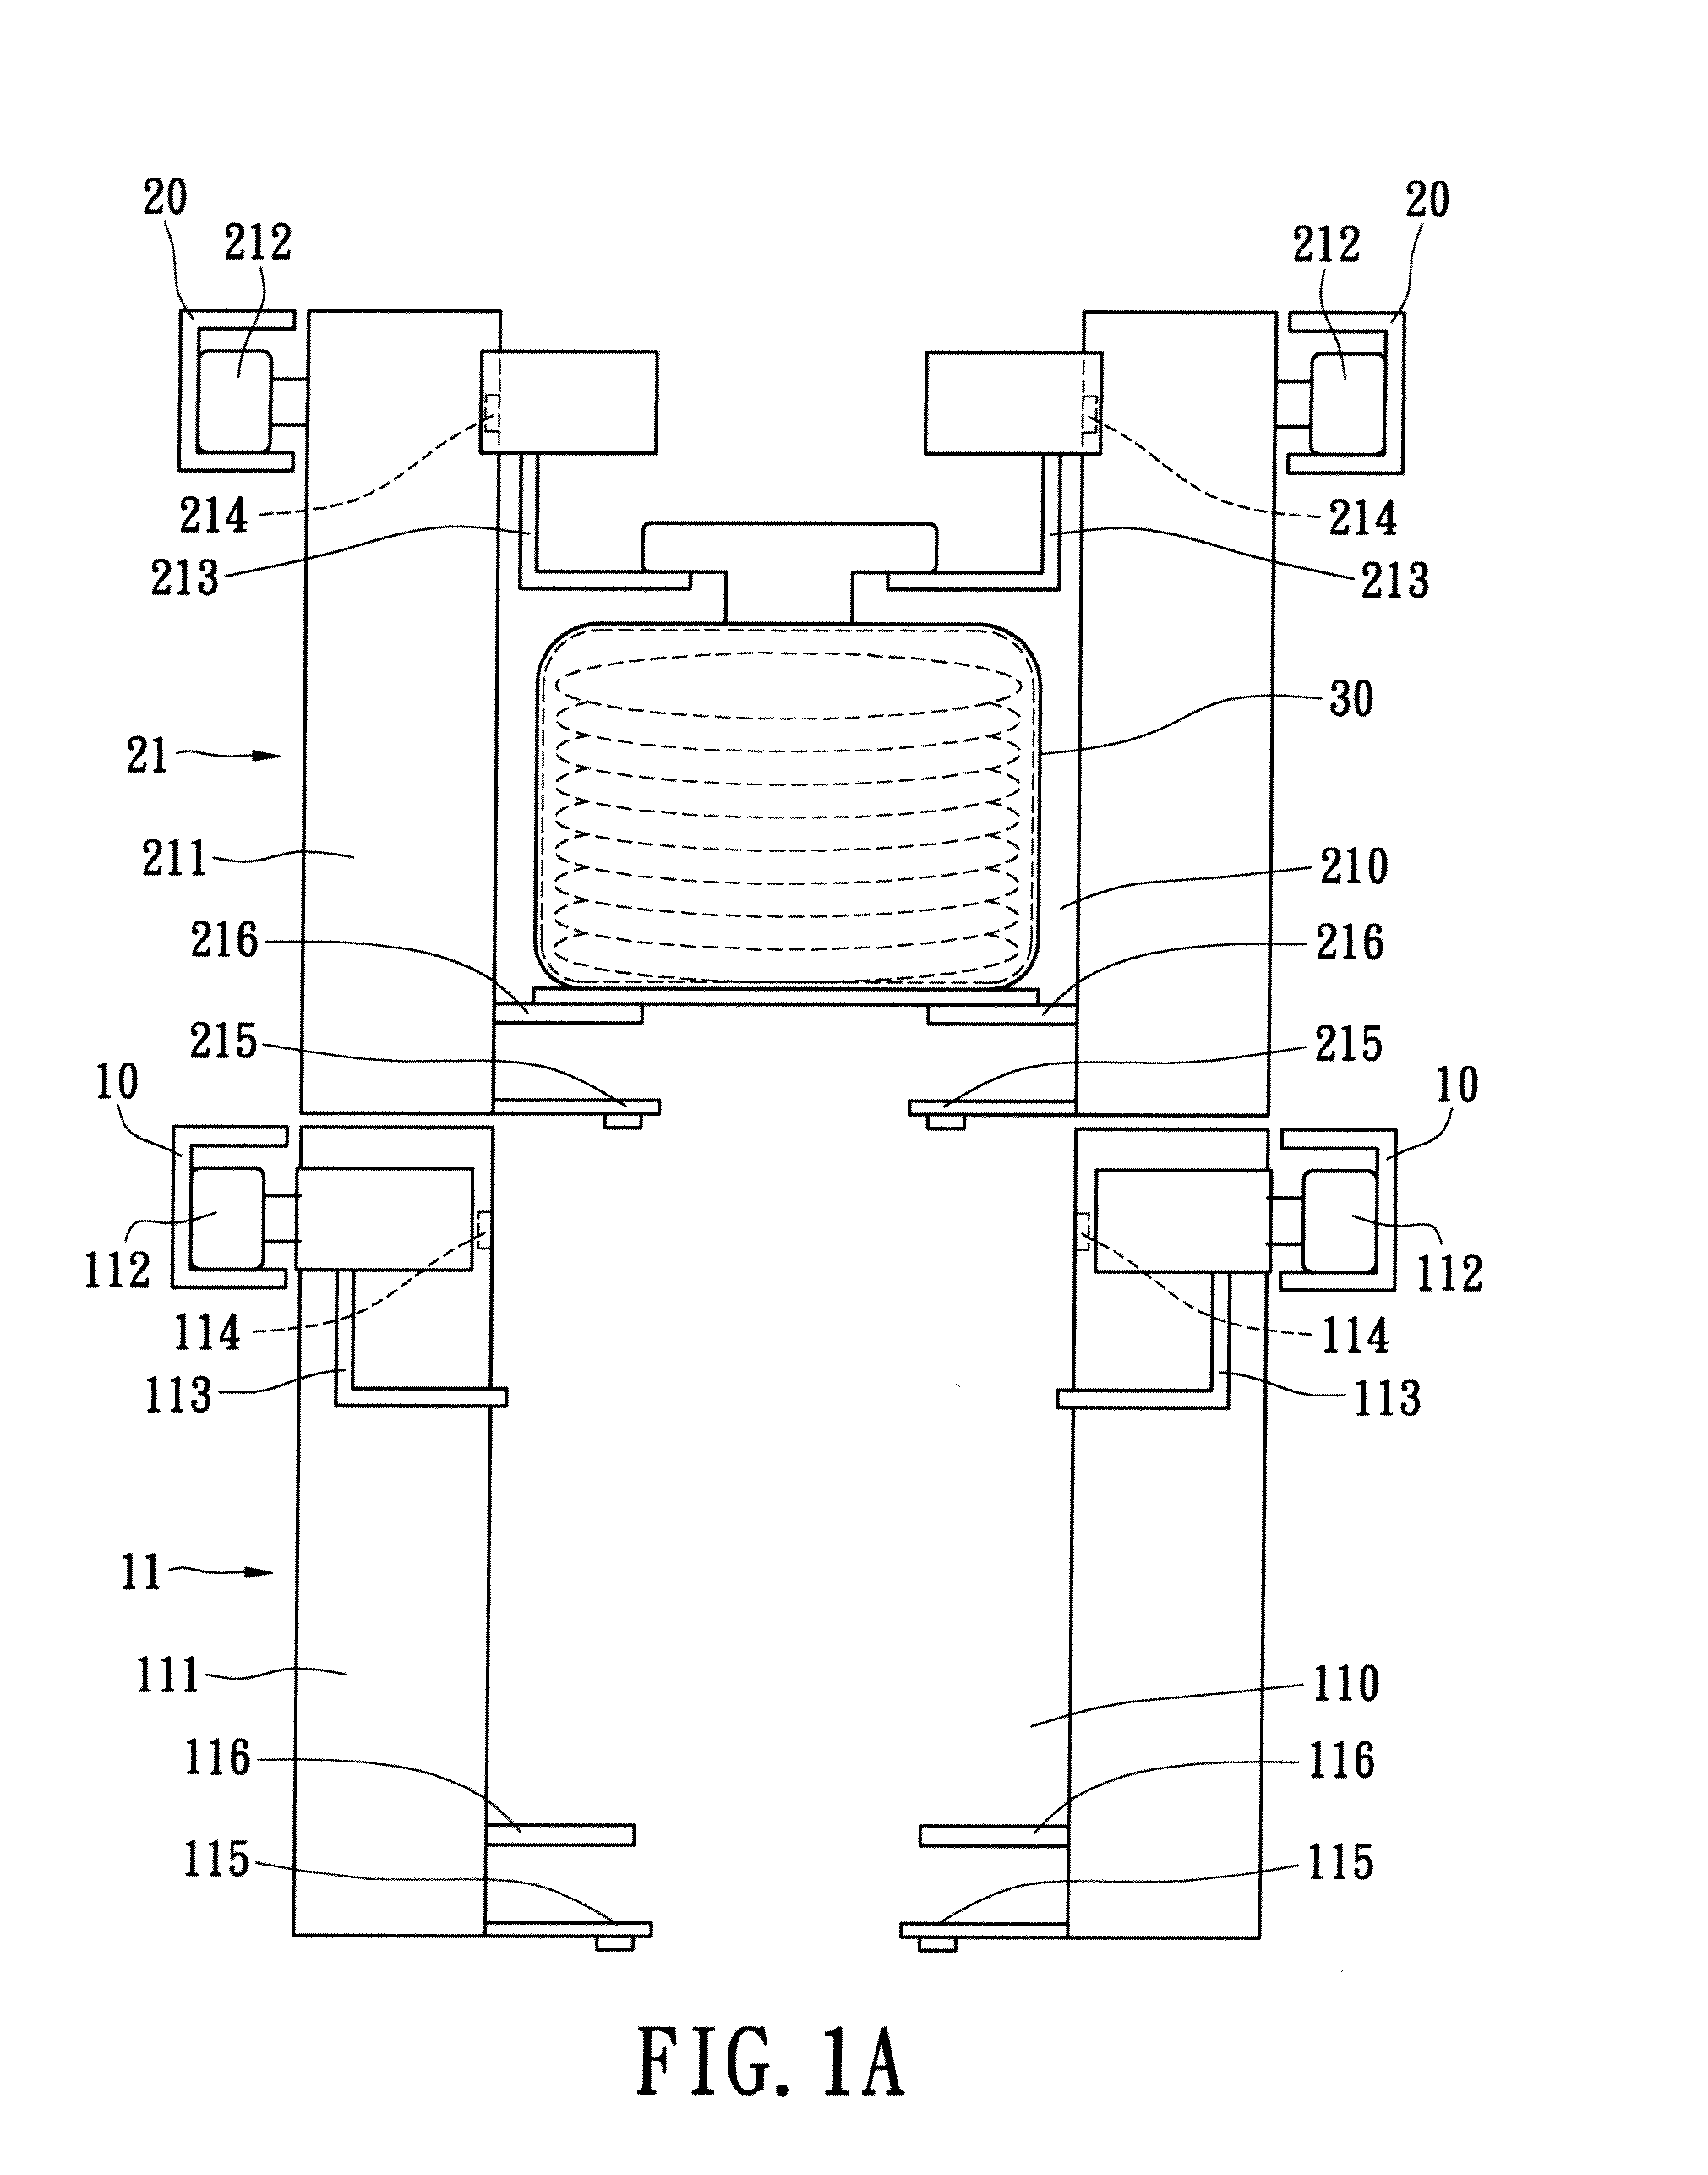 Transport system having multilayer tracks and controlling method thereof